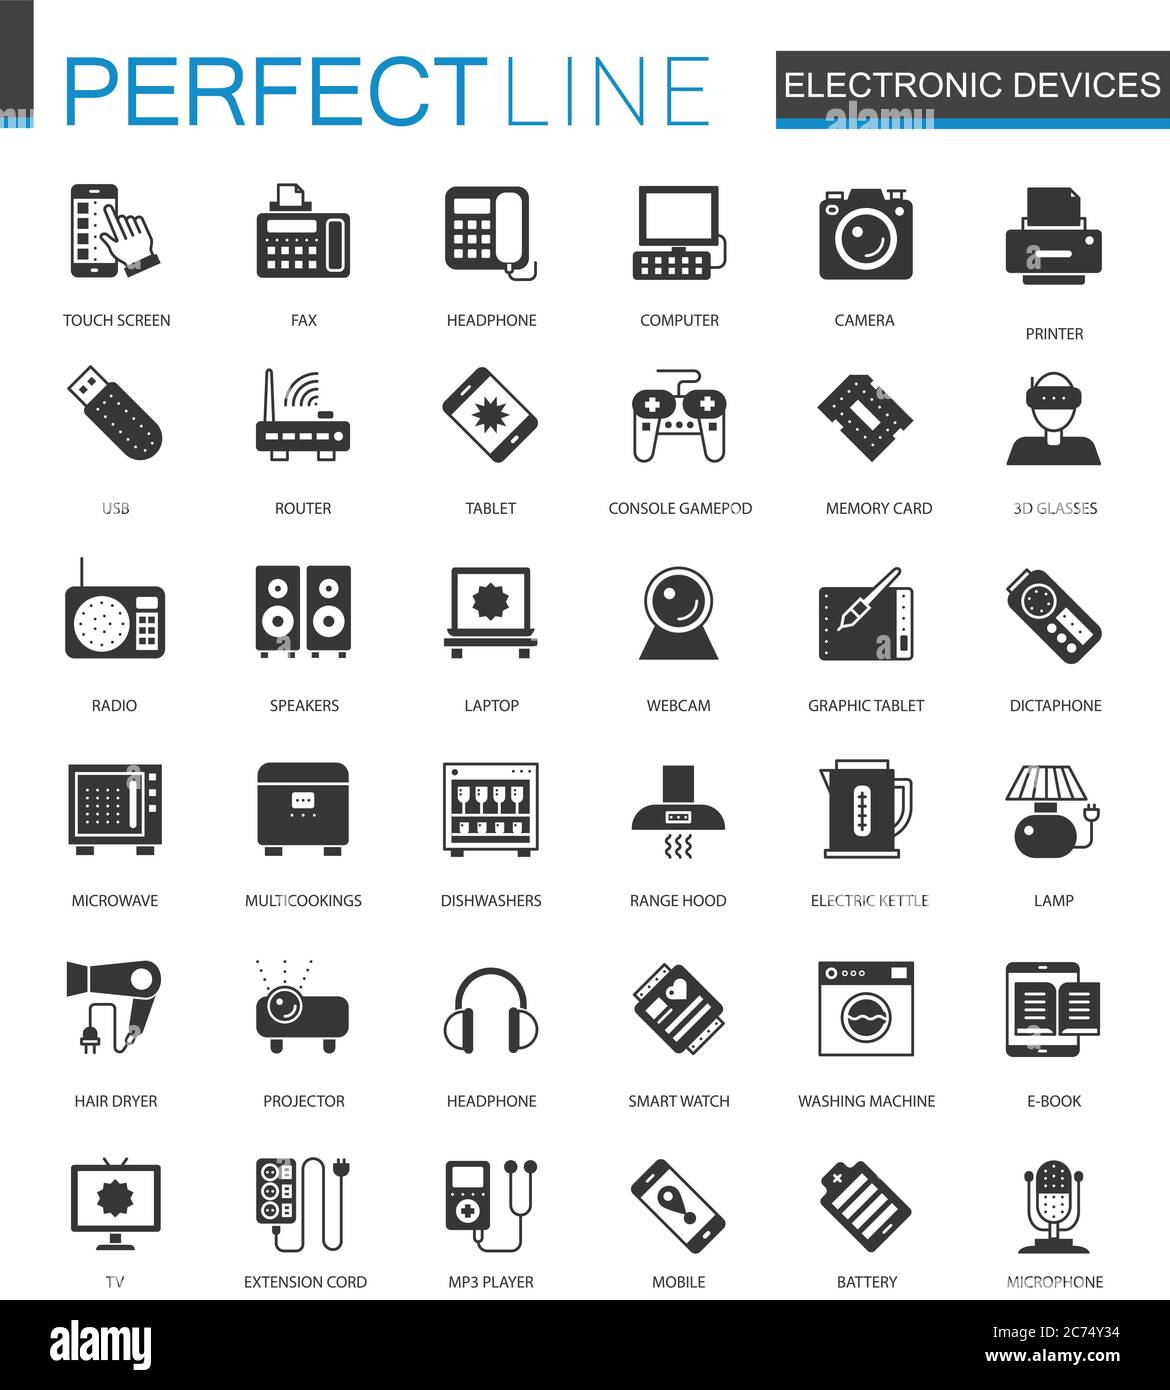 Black classic electronic devices icons set isolated Stock Vector